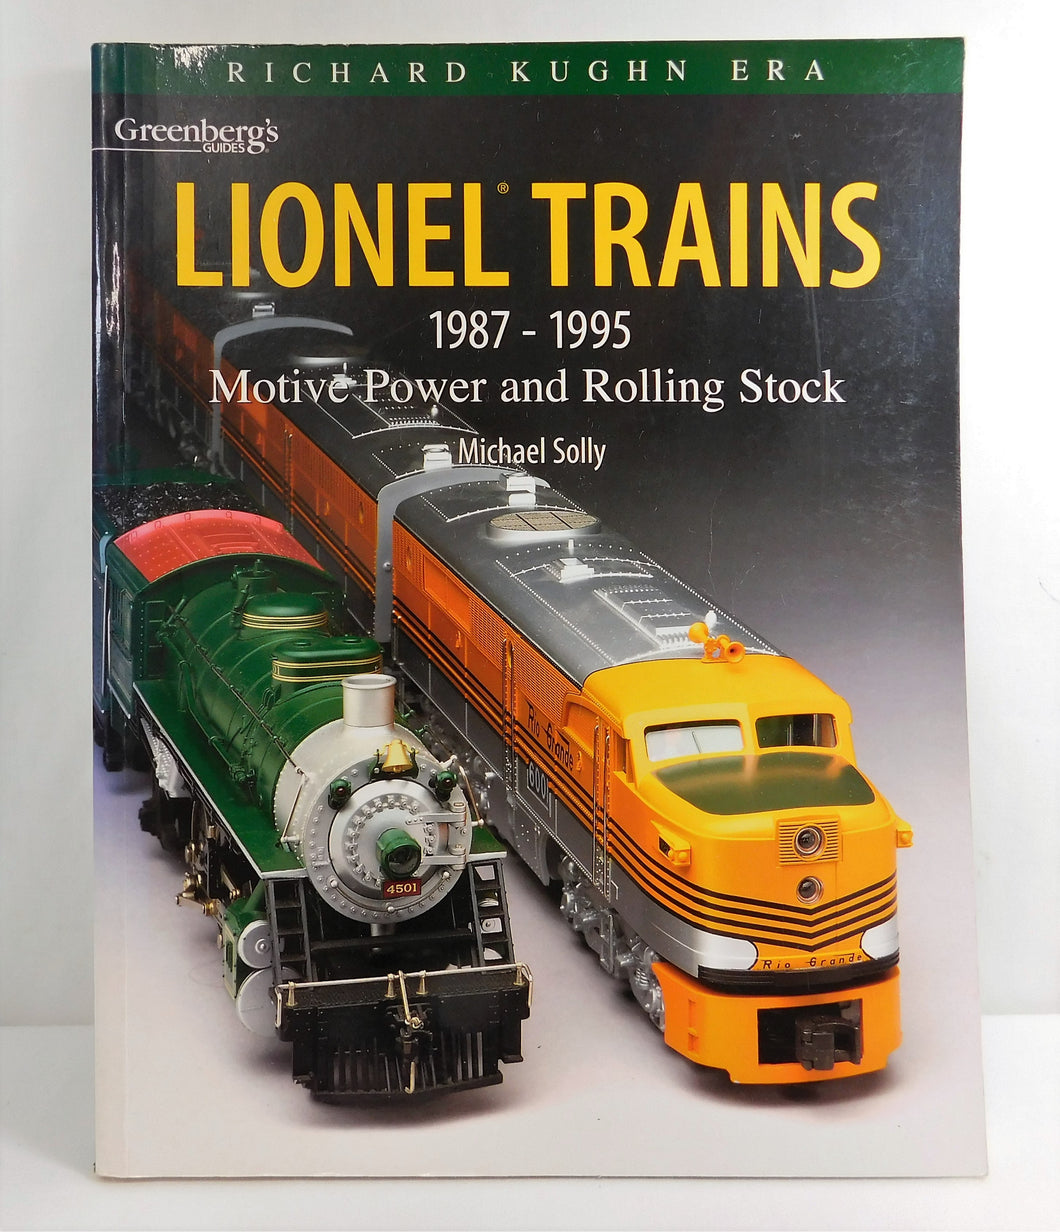 Greenberg's Guide to Lionel Trains 1987-1995: Motive Power and Rolling Stock : Richard Kughn Era Softback